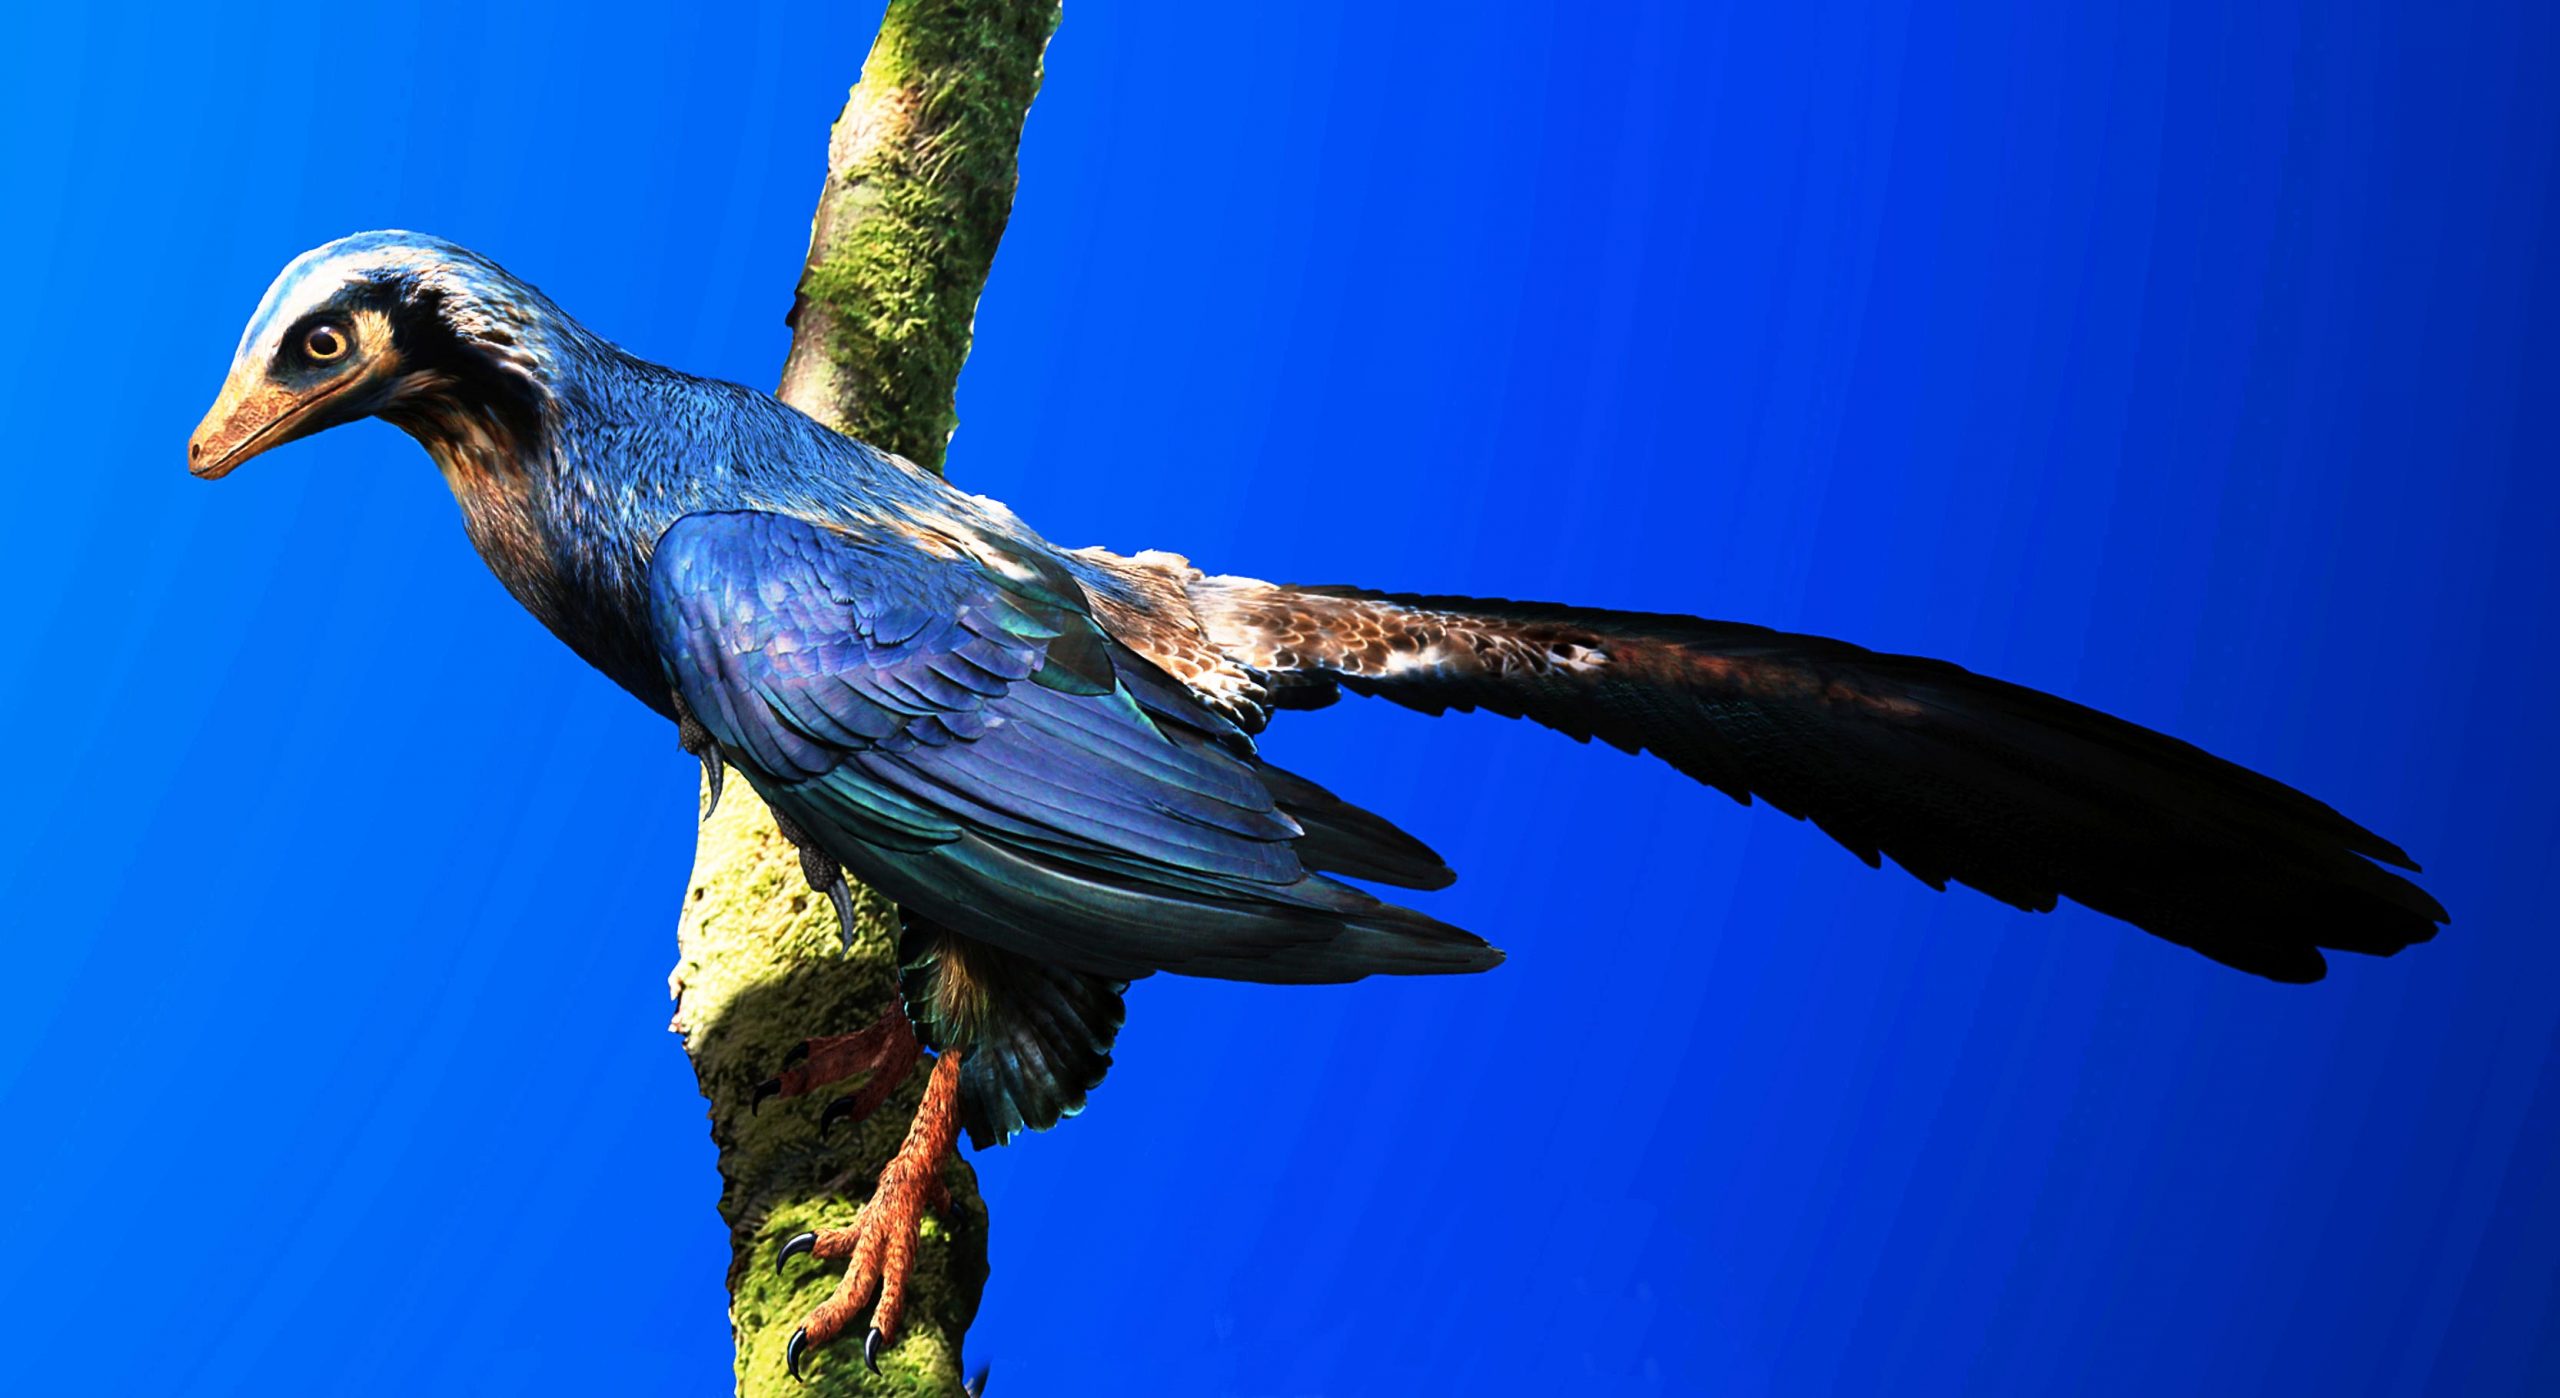 new-insights-into-the-origins-of-flight-from-ancient-archaeopteryx-fossil